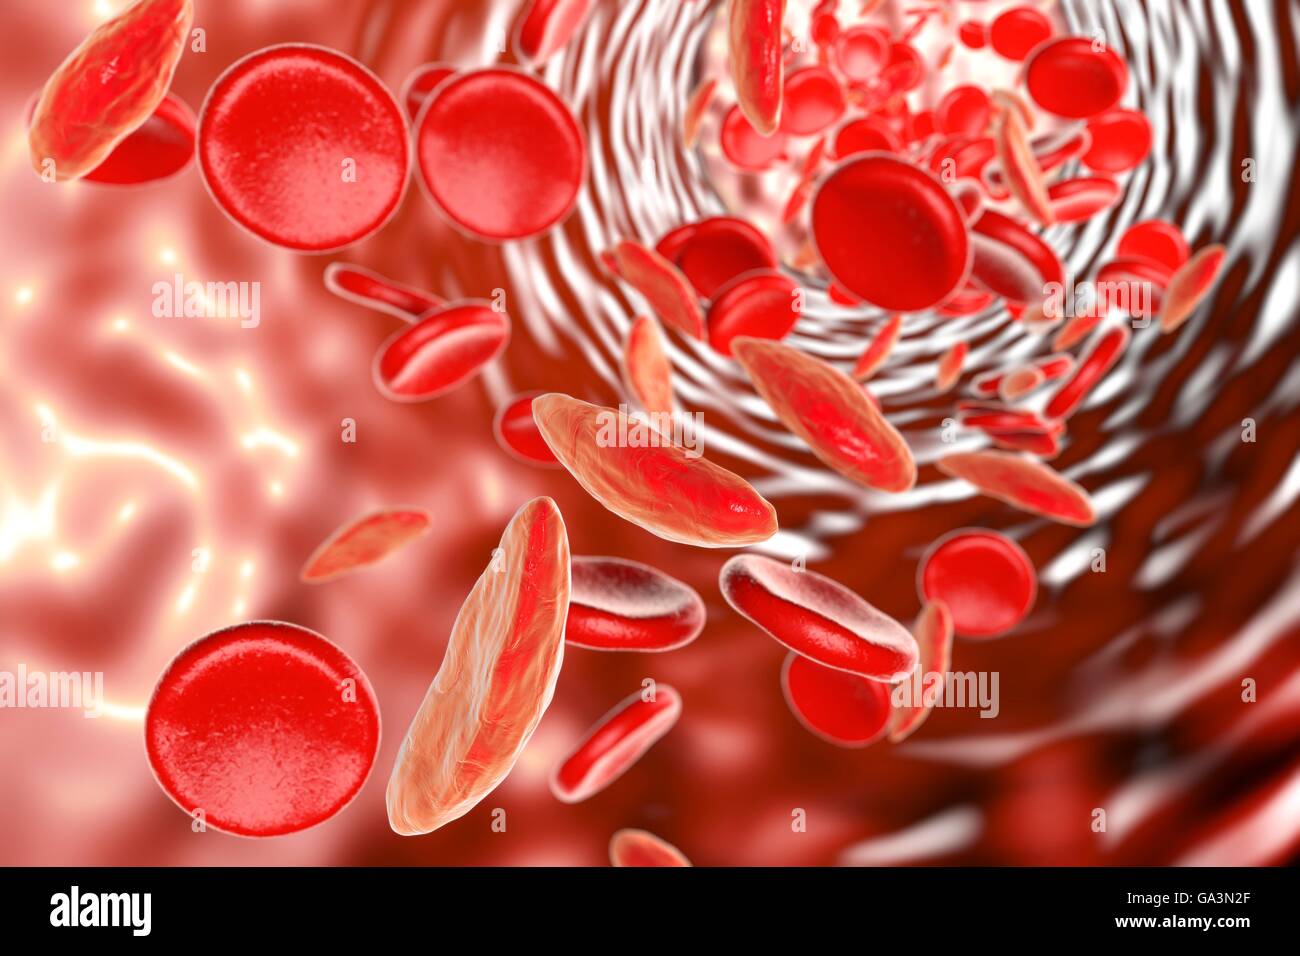 Sickle cell anaemia. Artwork showing normal red blood cells (round), and red blood cells affected by sickle cell anaemia (crescent shaped). This is a disease in which the red blood cells contain an abnormal form of haemoglobin (blood's oxygen-carrying pigment) that causes the blood cells to become sickle-shaped, rather than round. Sickle cells cannot move through small blood vessels as easily as normal cells and so can cause blockages (right). This prevents oxygen from reaching the tissues, causes severe pain and organ damage. Stock Photo